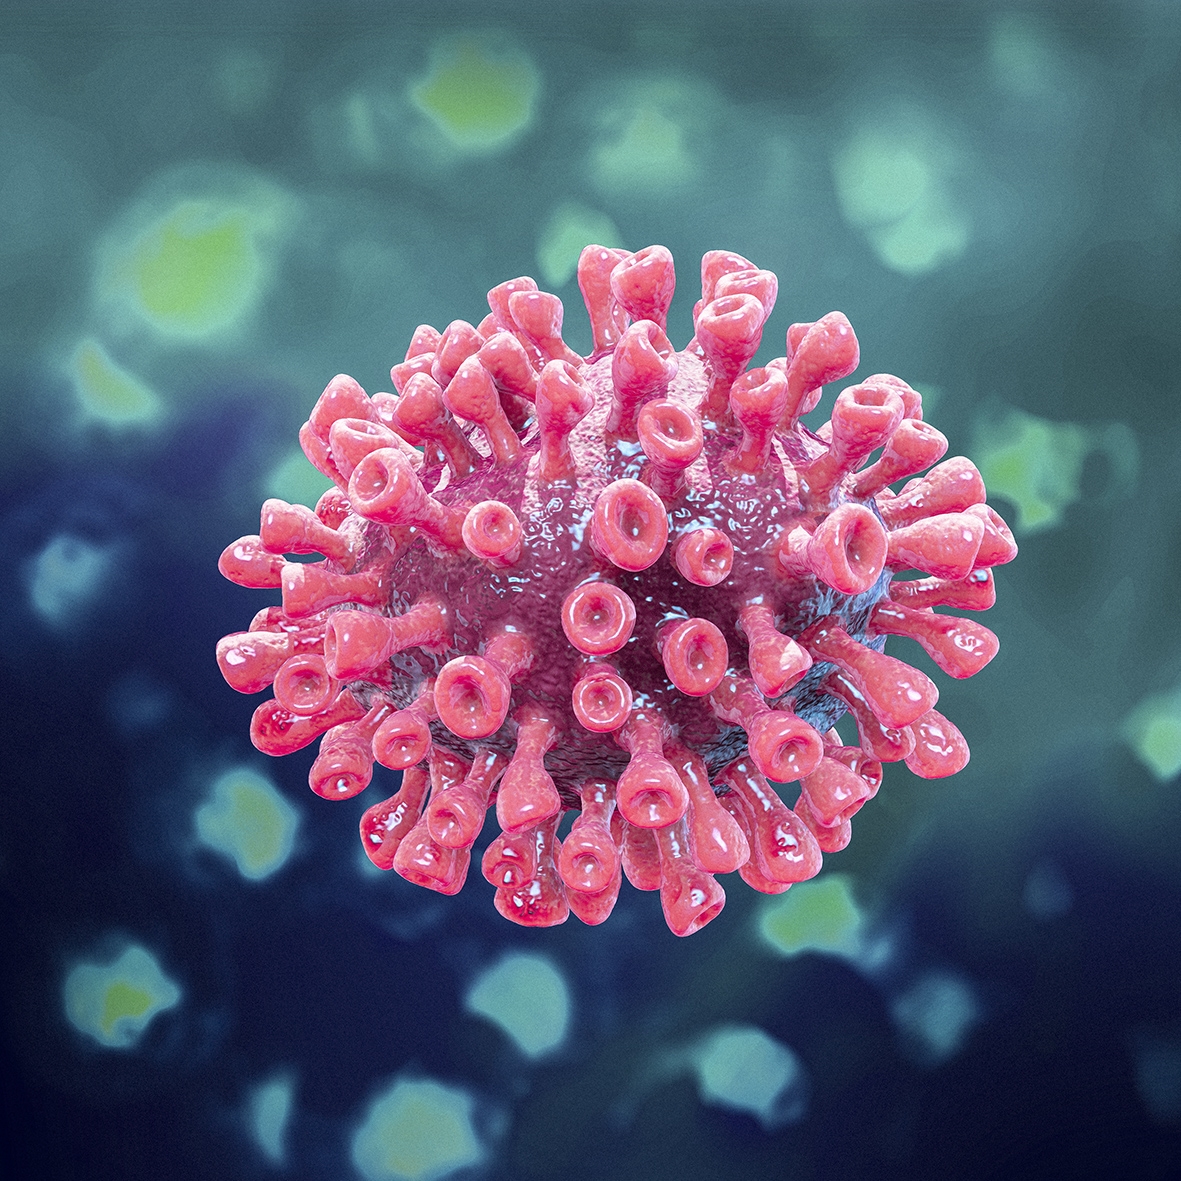 Color Pictures of Coronavirus